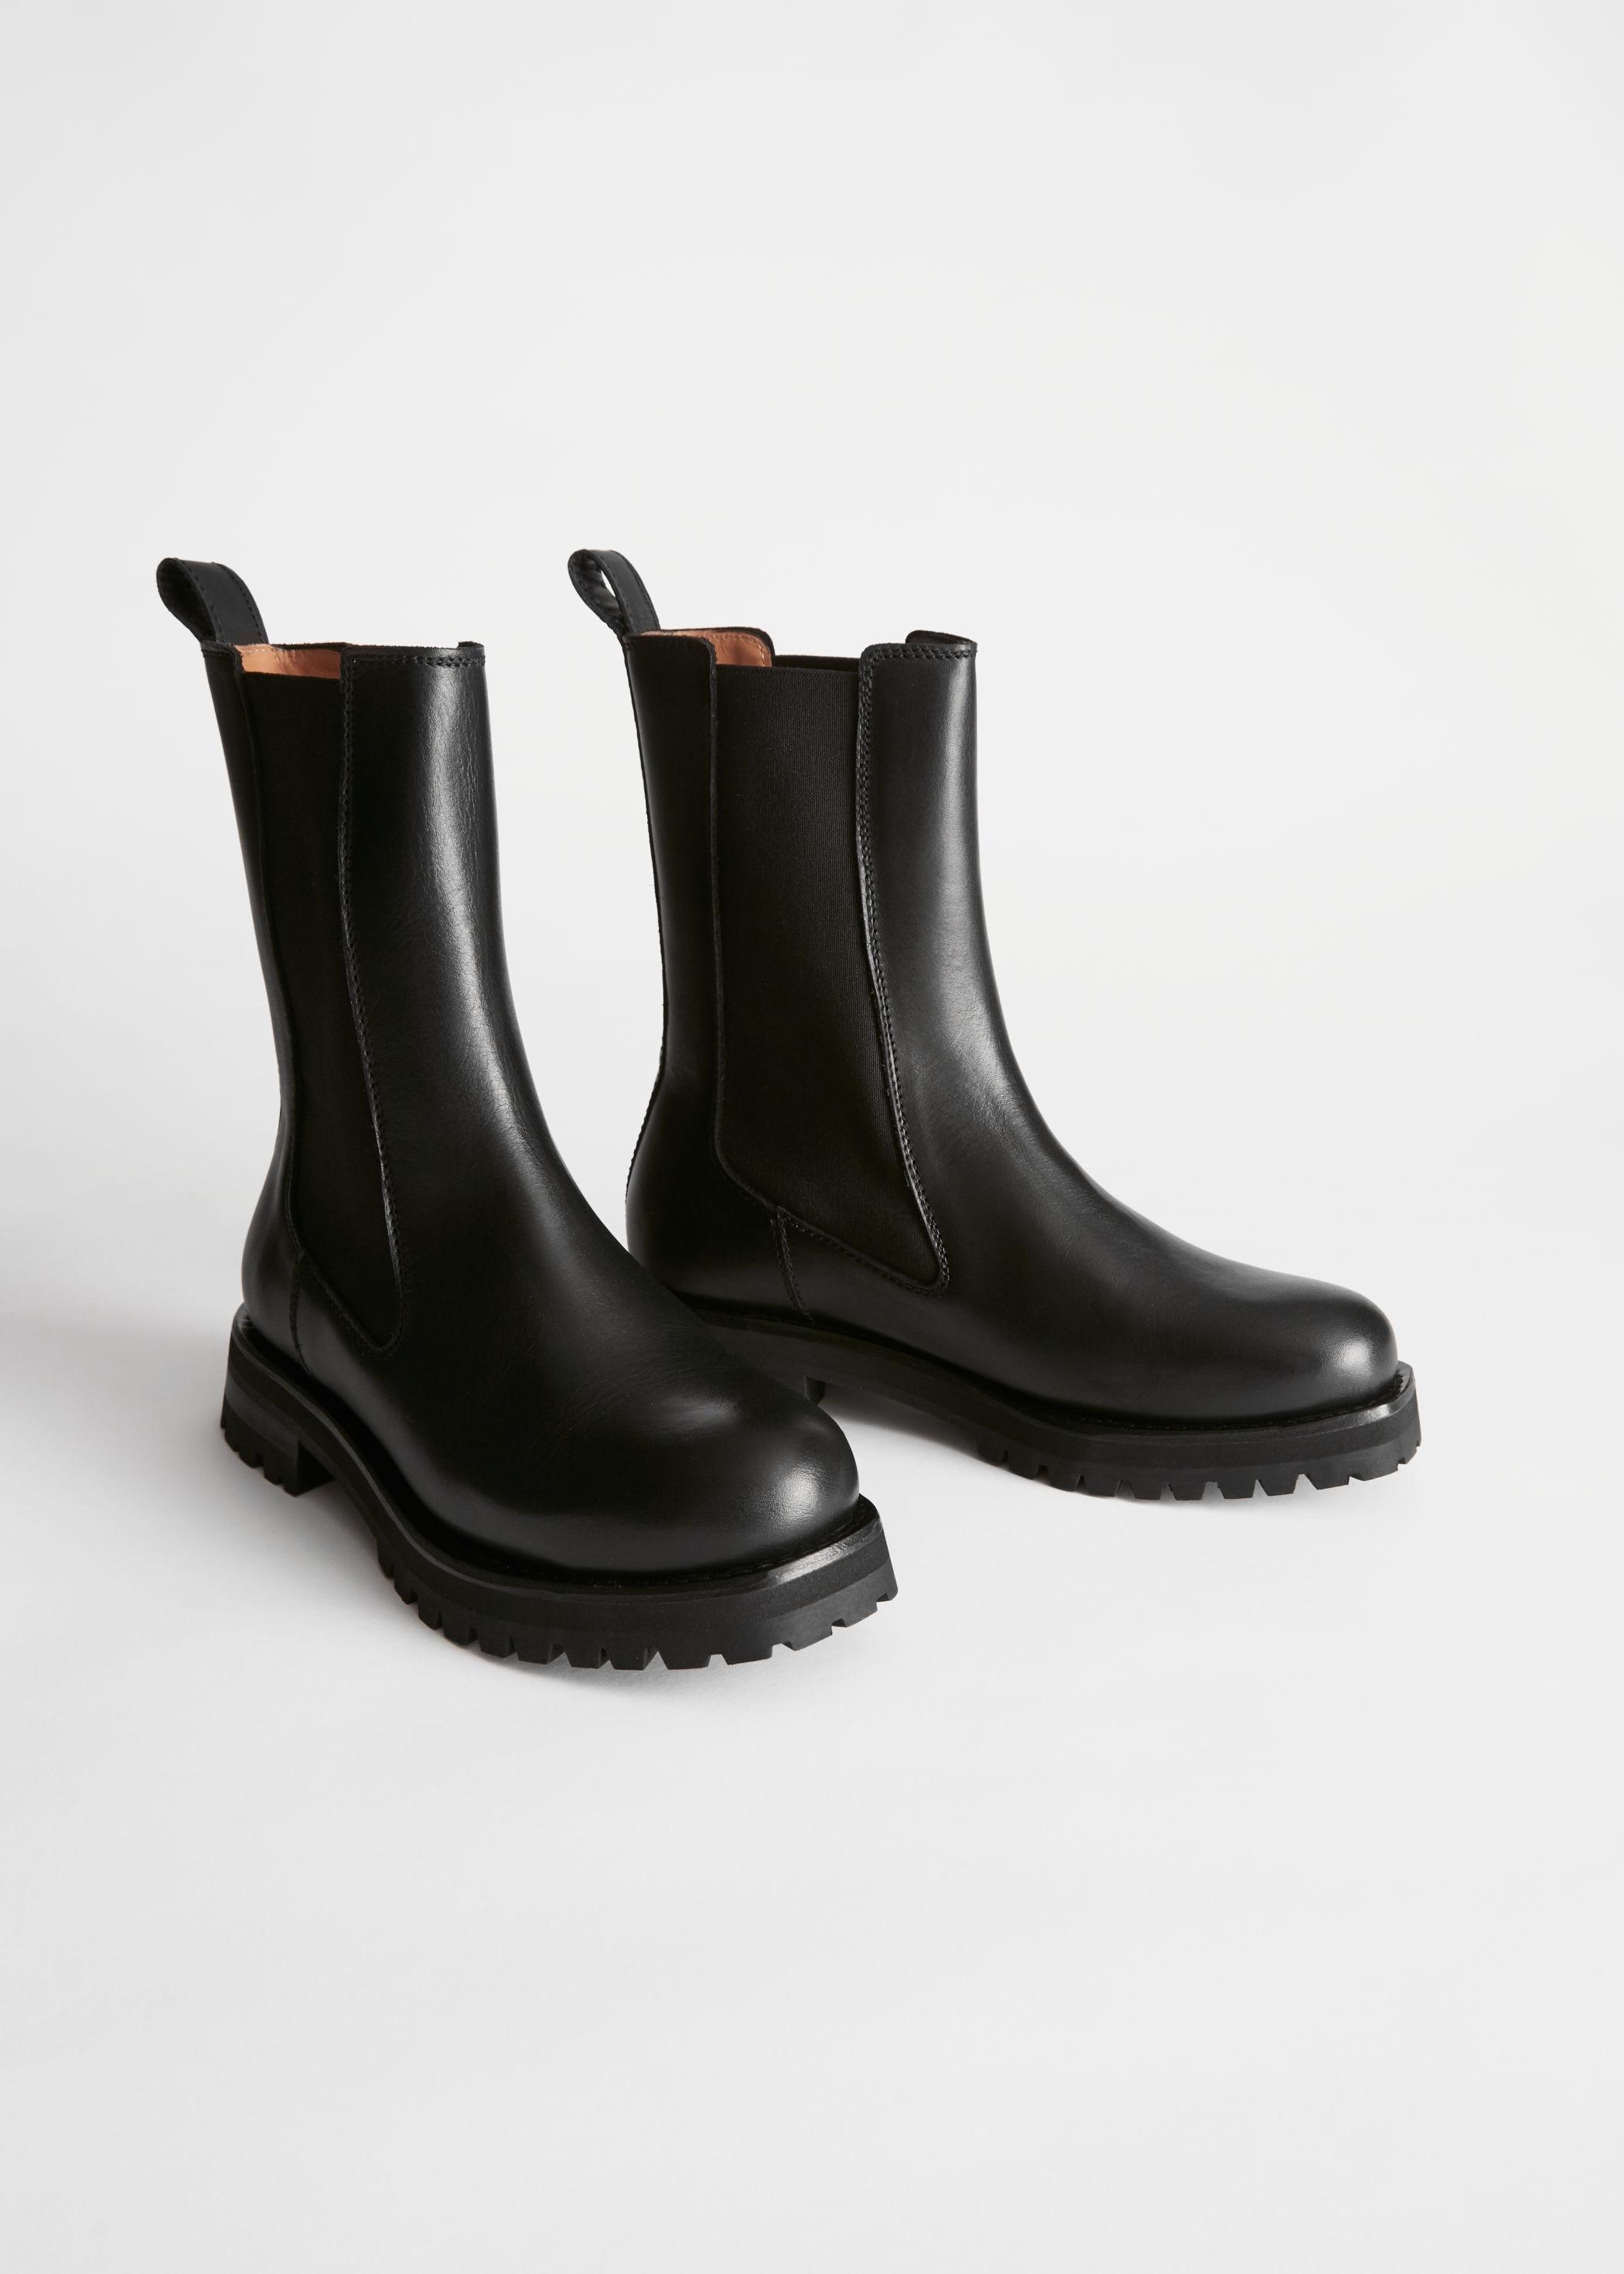 & Other Stories Chunky Sole Leather Chelsea Boots in Black - Lyst